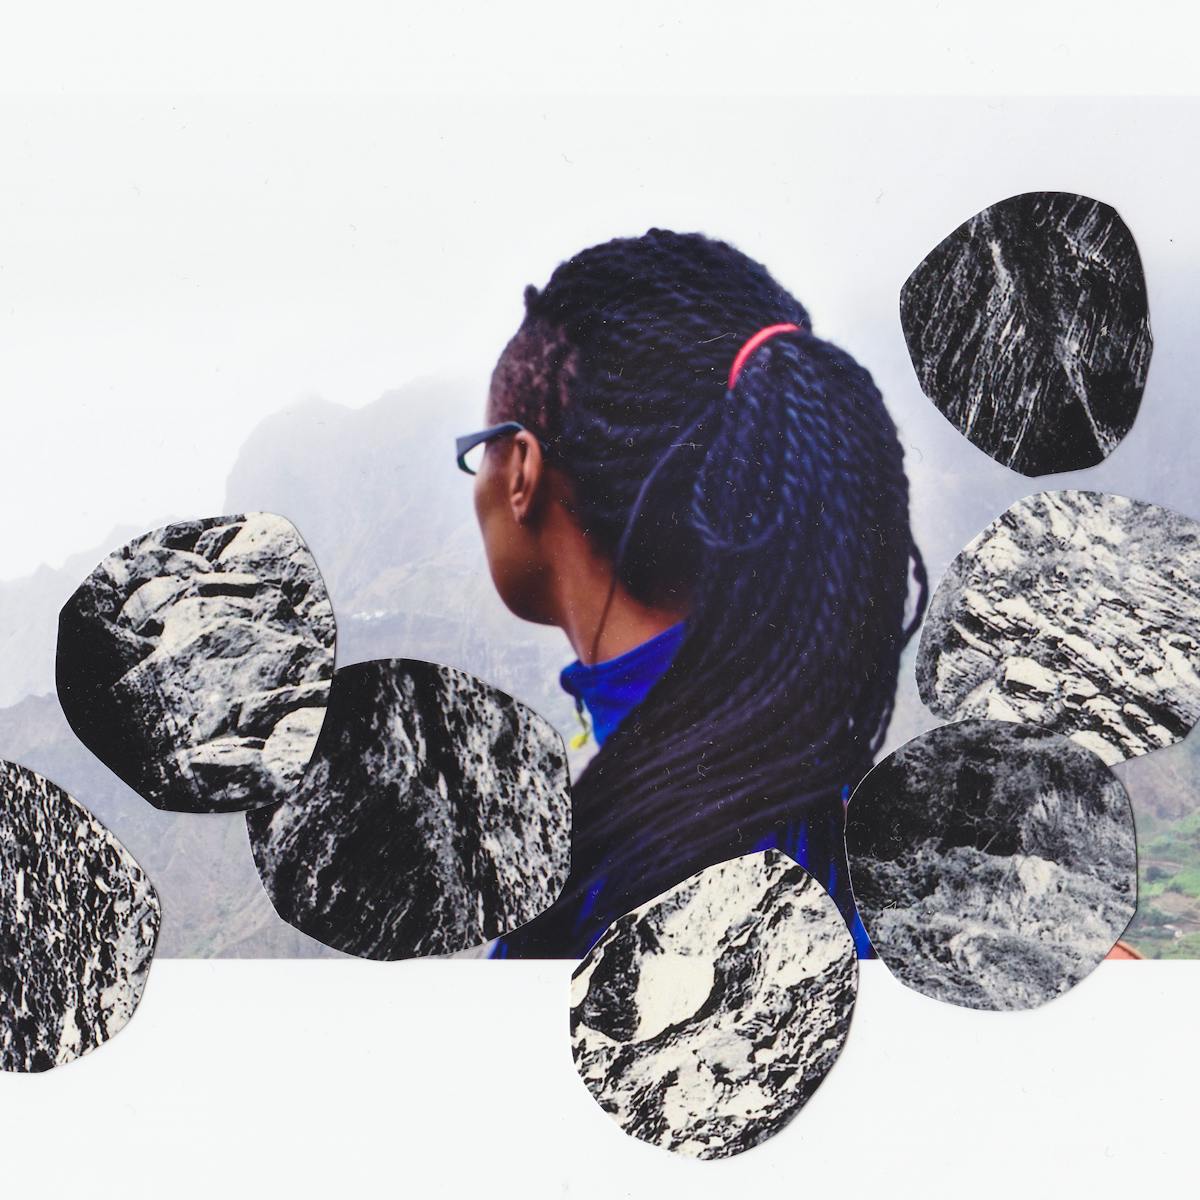 Mixed media collage artwork using a combination of two different photographic prints. The background of the collage is made up of a colour photograph of the back of the head and side profile of a young woman with long black hair, wearing glasses and a blue top. She is looking off away from the camera to the left, into the distance. Behind her is a misty view of a mountain range and green valley. Overlaid on top of this scene are cut out, irregular circular elements each of which is made up of a black and white image of rock formations. The circular pieces are placed like boulders cascading downwards.